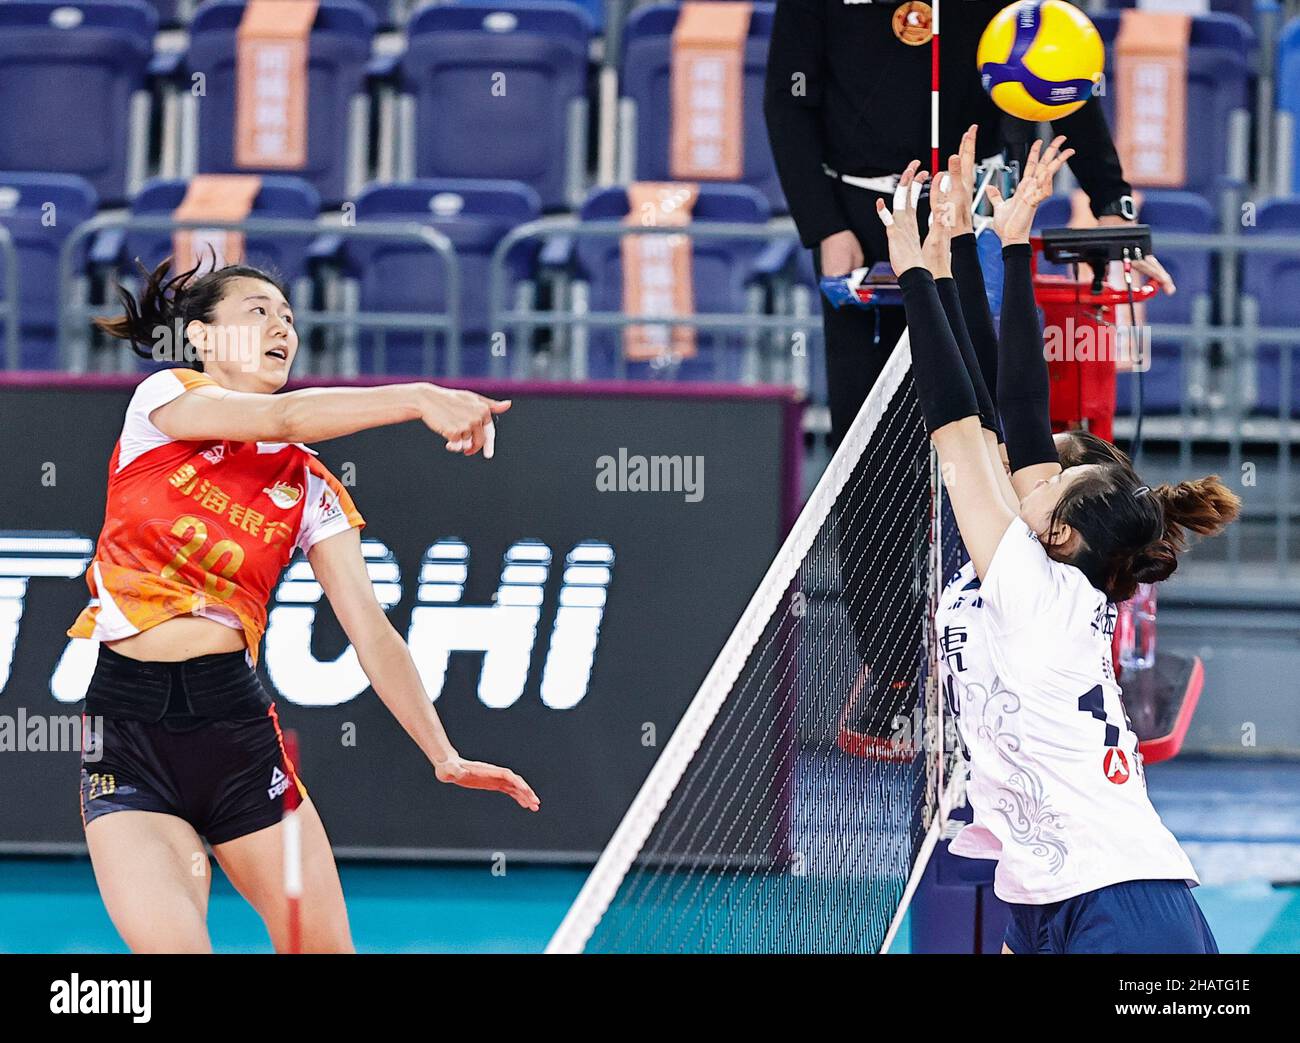 Jiangmen, China's Guangdong Province. 15th Dec, 2021. Wang Yizhu (L) of Tianjin spikes the ball during the Group C match between Tianjin and Shenzhen at the second stage of the 2021-2022 season Chinese Women's Volleyball Super League in Jiangmen, south China's Guangdong Province, Dec. 15, 2021. Credit: Yang Zhisen/Xinhua/Alamy Live News Stock Photo